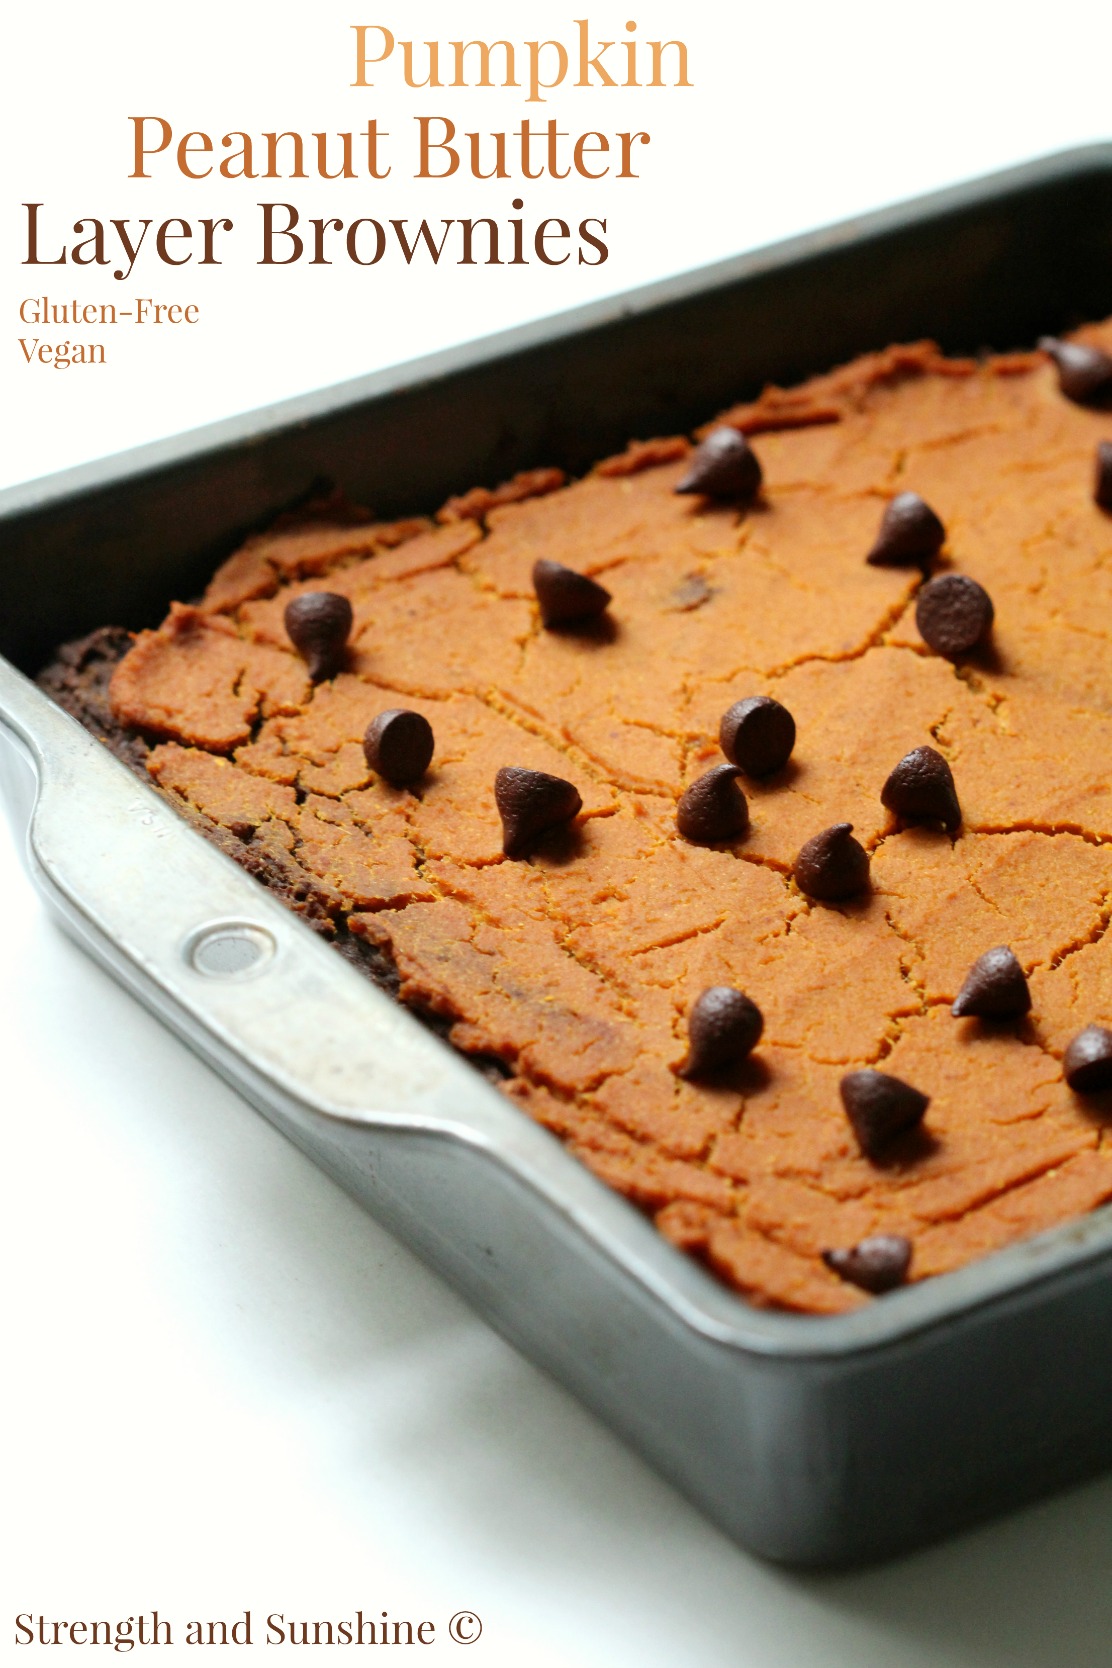 Pumpkin Peanut Butter Layer Brownies | Strength and Sunshine @RebeccaGF666 Where pumpkin, peanut, and chocolate combine! Pumpkin Peanut Butter Layer Brownies will make you rethink your definition of brownie. These gluten-free and vegan brownies are the healthiest of holiday indulgences, you won't have to stop at one! They can be dessert or breakfast! 